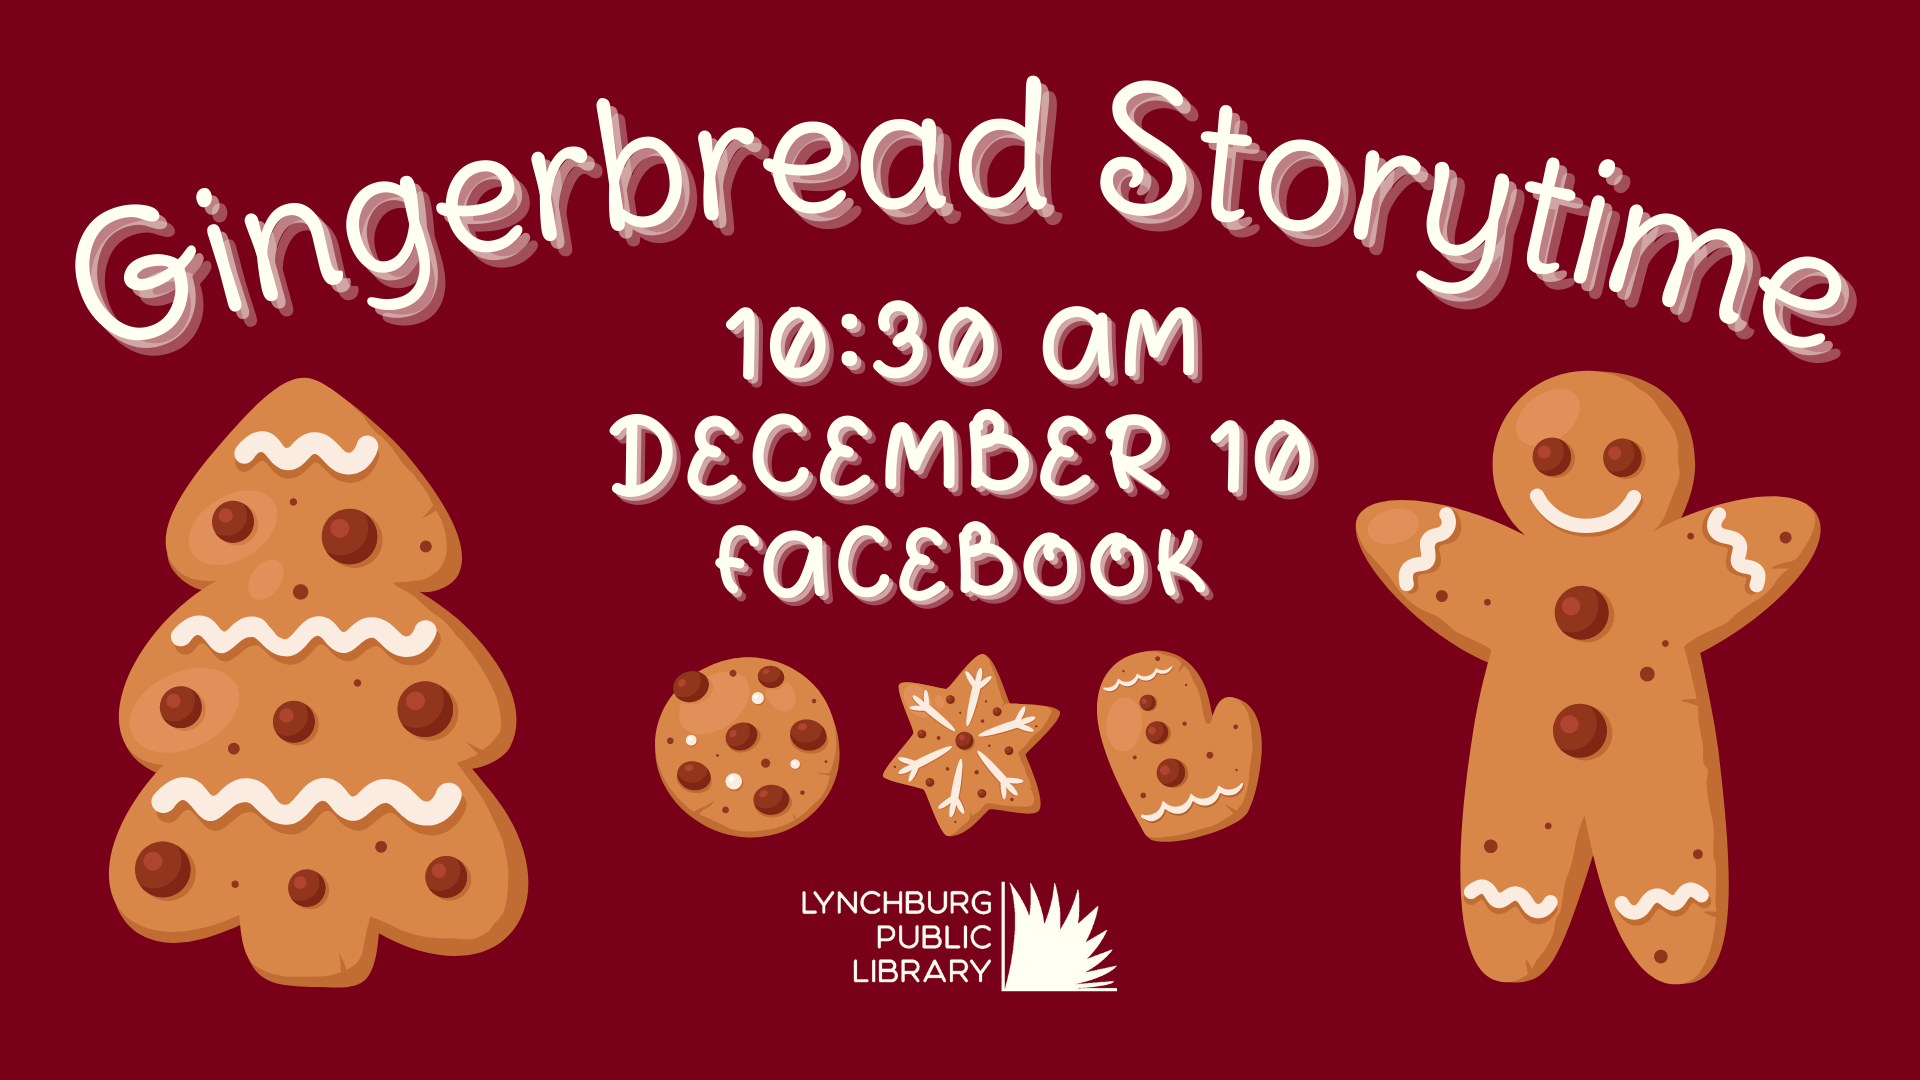 Image features cartoon gingerbread cookies on a burgundy background, with the text: Gingerbread Storytime, 10:30 AM December 10, Facebook.